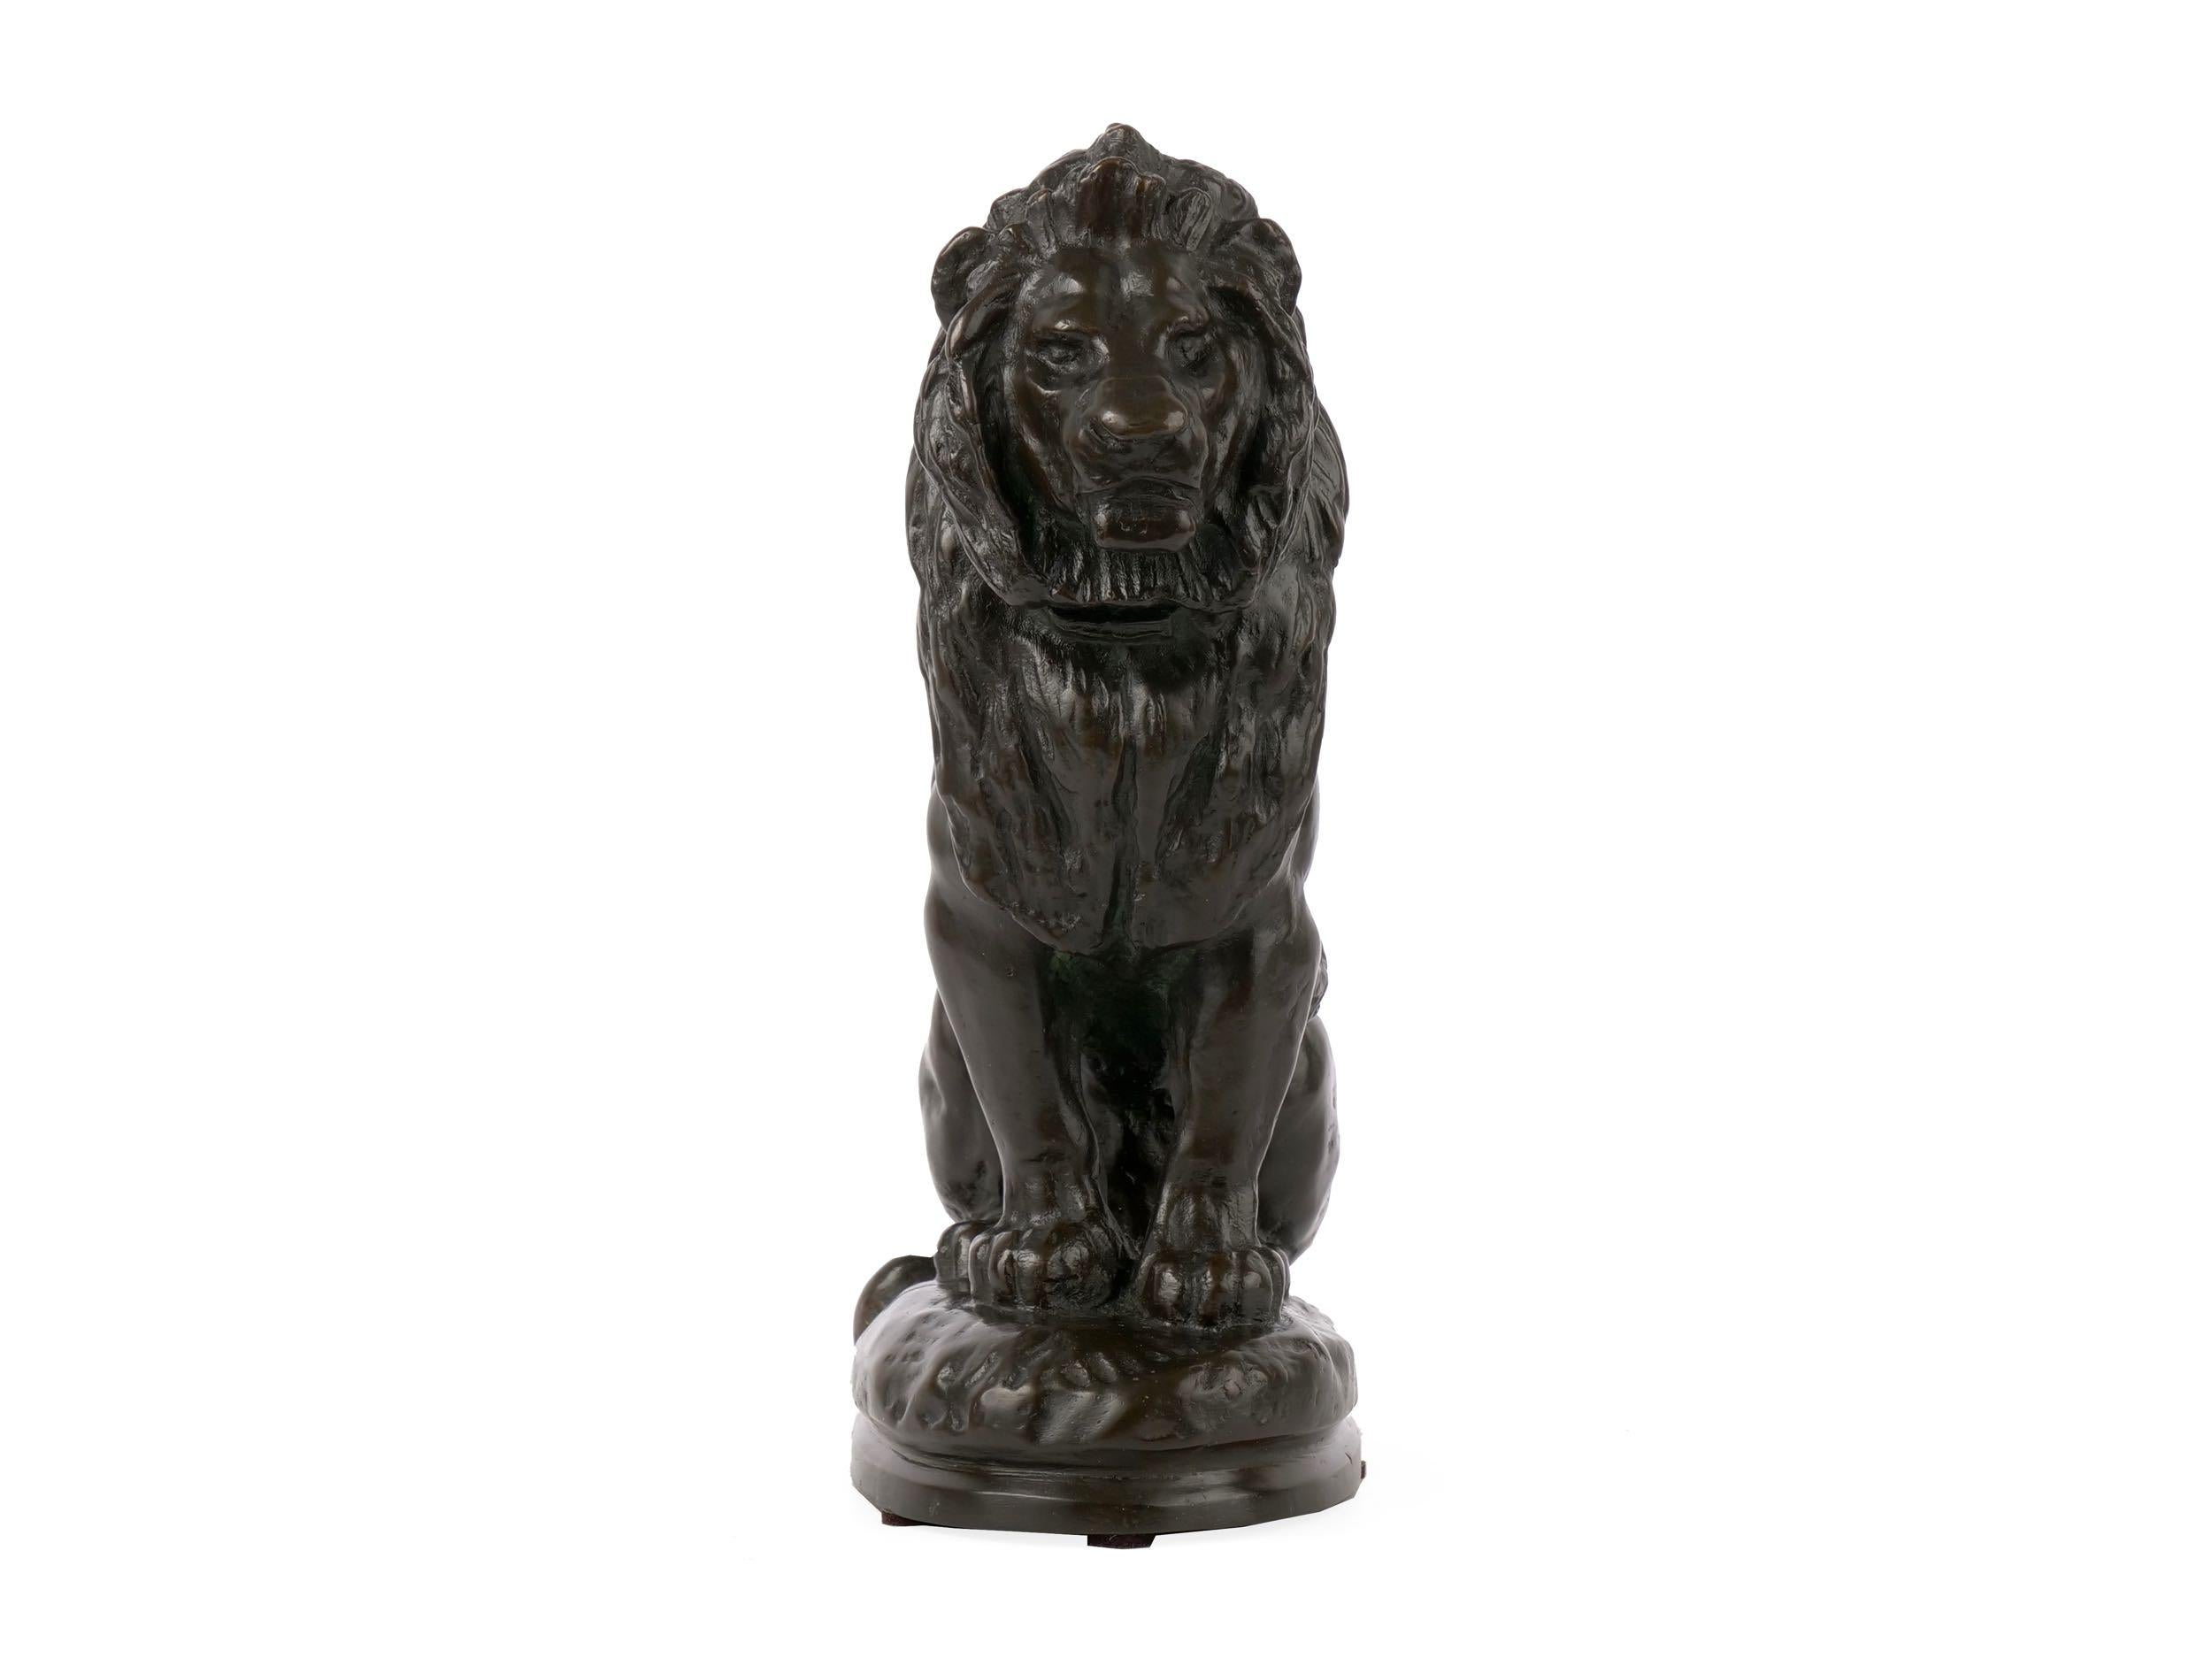 20th Century “Seated Lion” Antique French Bronze Sculpture Cast after Antoine-Louis Barye